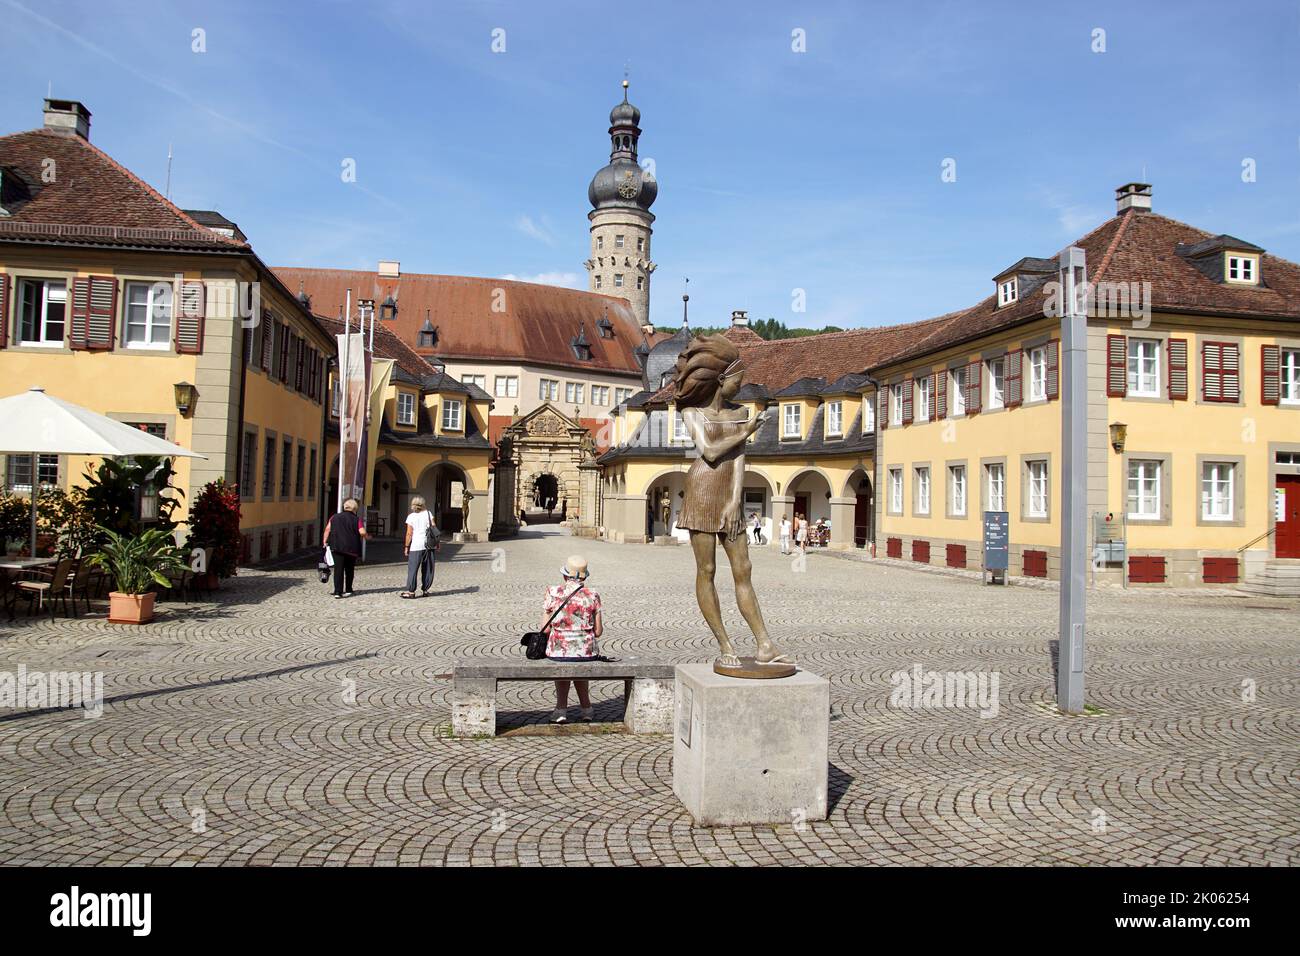 Bronze sculpture 'Nora' by Malgorzata Chodakowska. On the square in front of the entrance to the German castle Weikersheim. Summer. August, Germany. Stock Photo